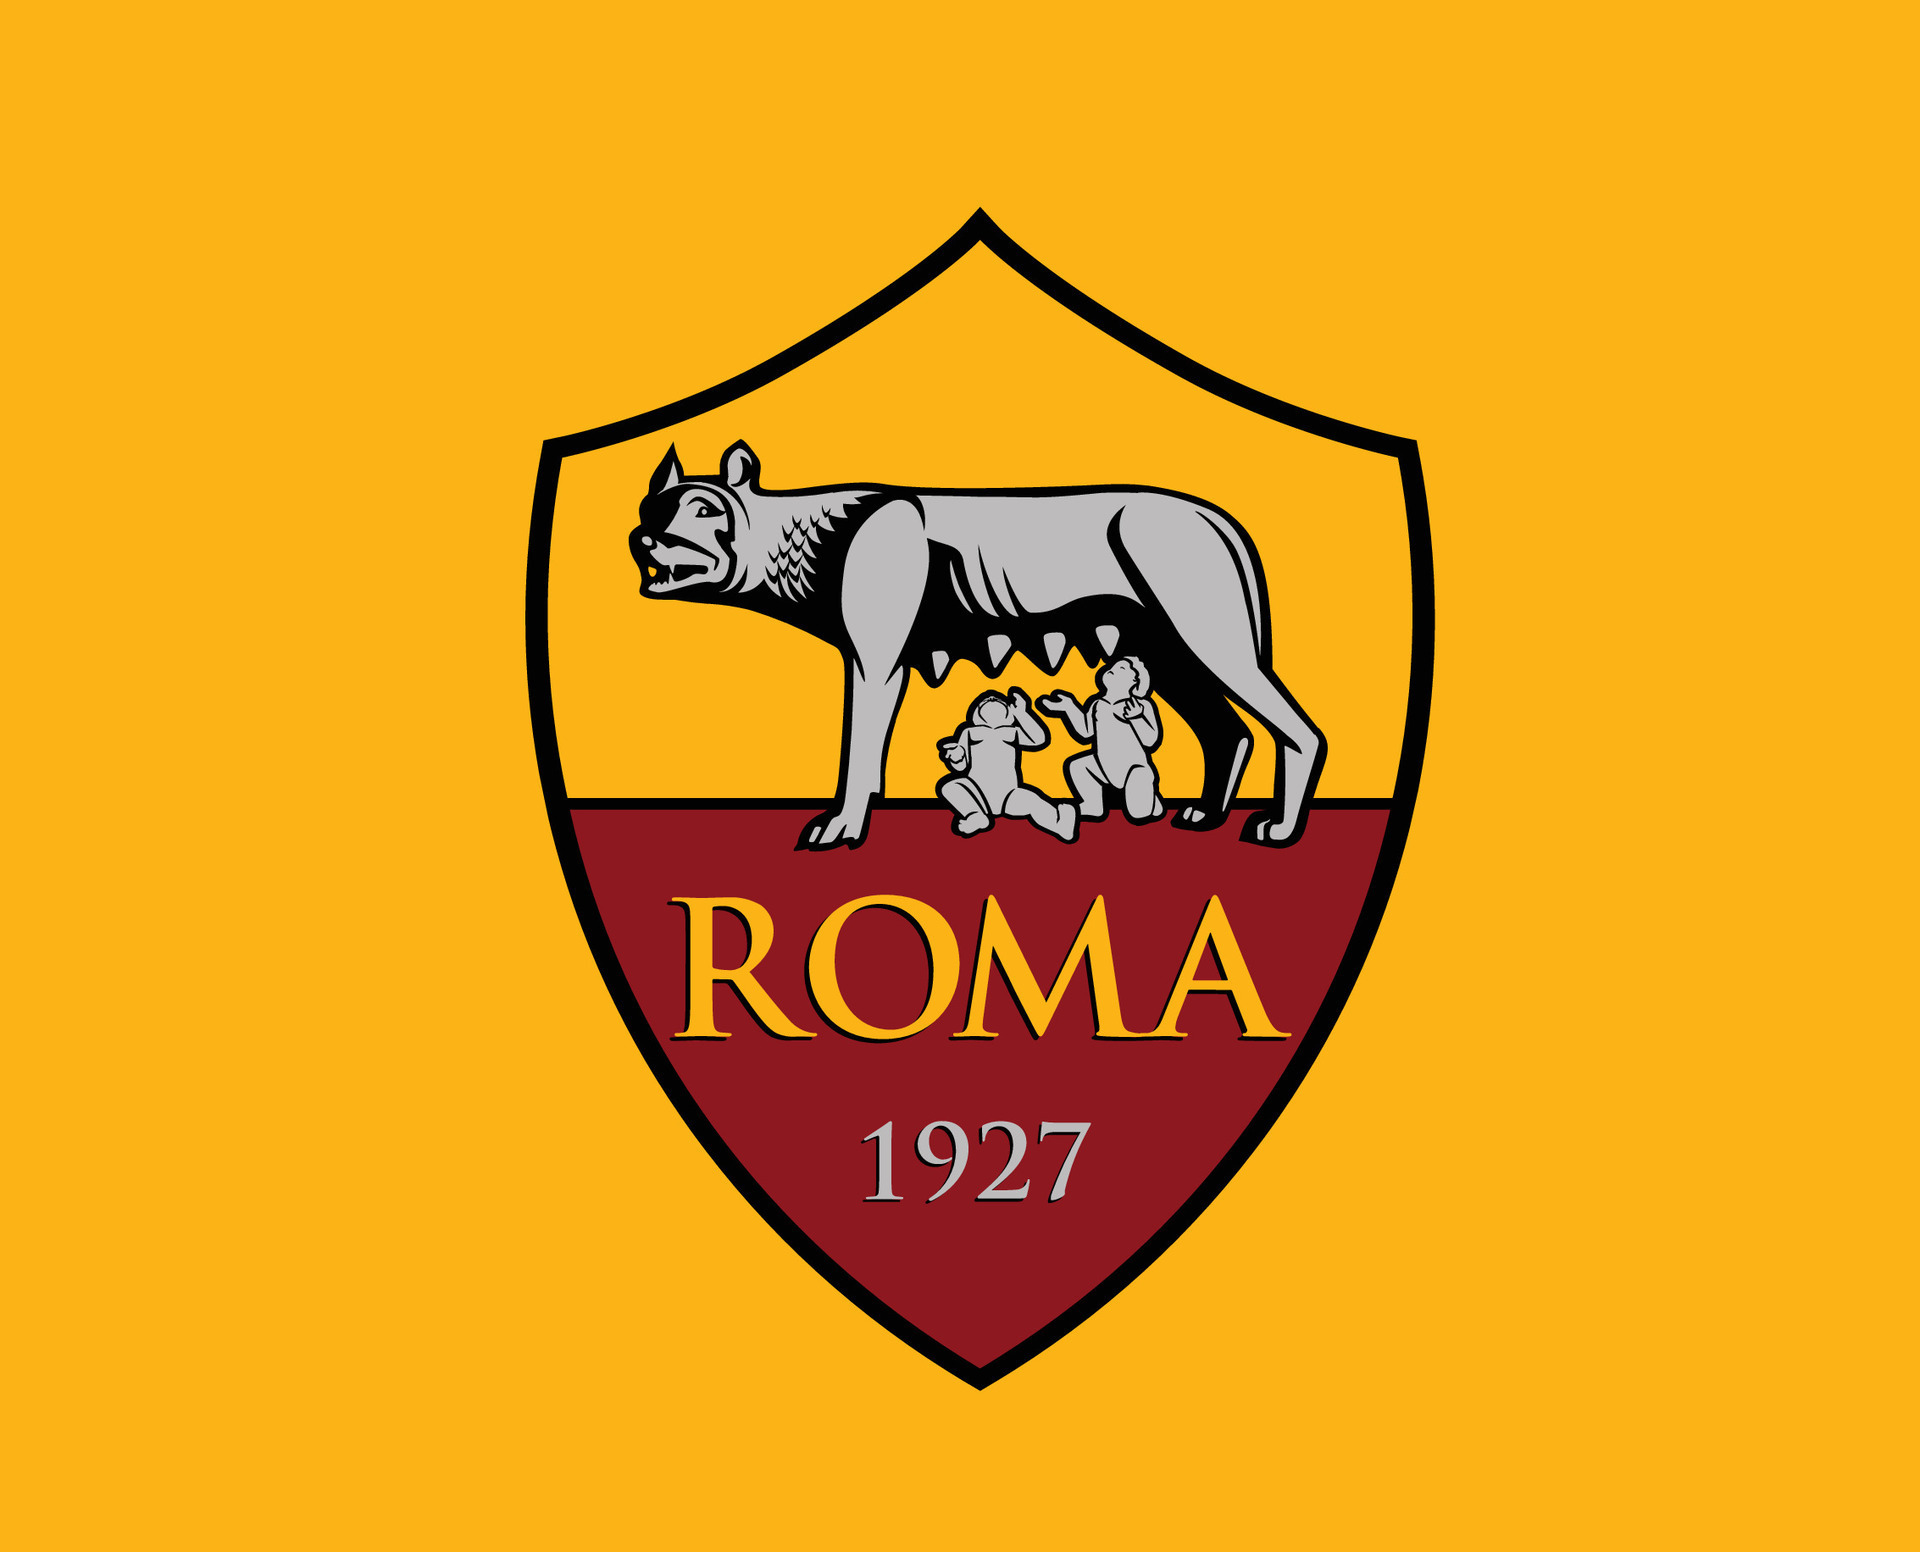 https://static.vecteezy.com/system/resources/previews/027/484/448/original/as-roma-club-logo-symbol-serie-a-football-calcio-italy-abstract-design-illustration-with-yellow-background-free-vector.jpg